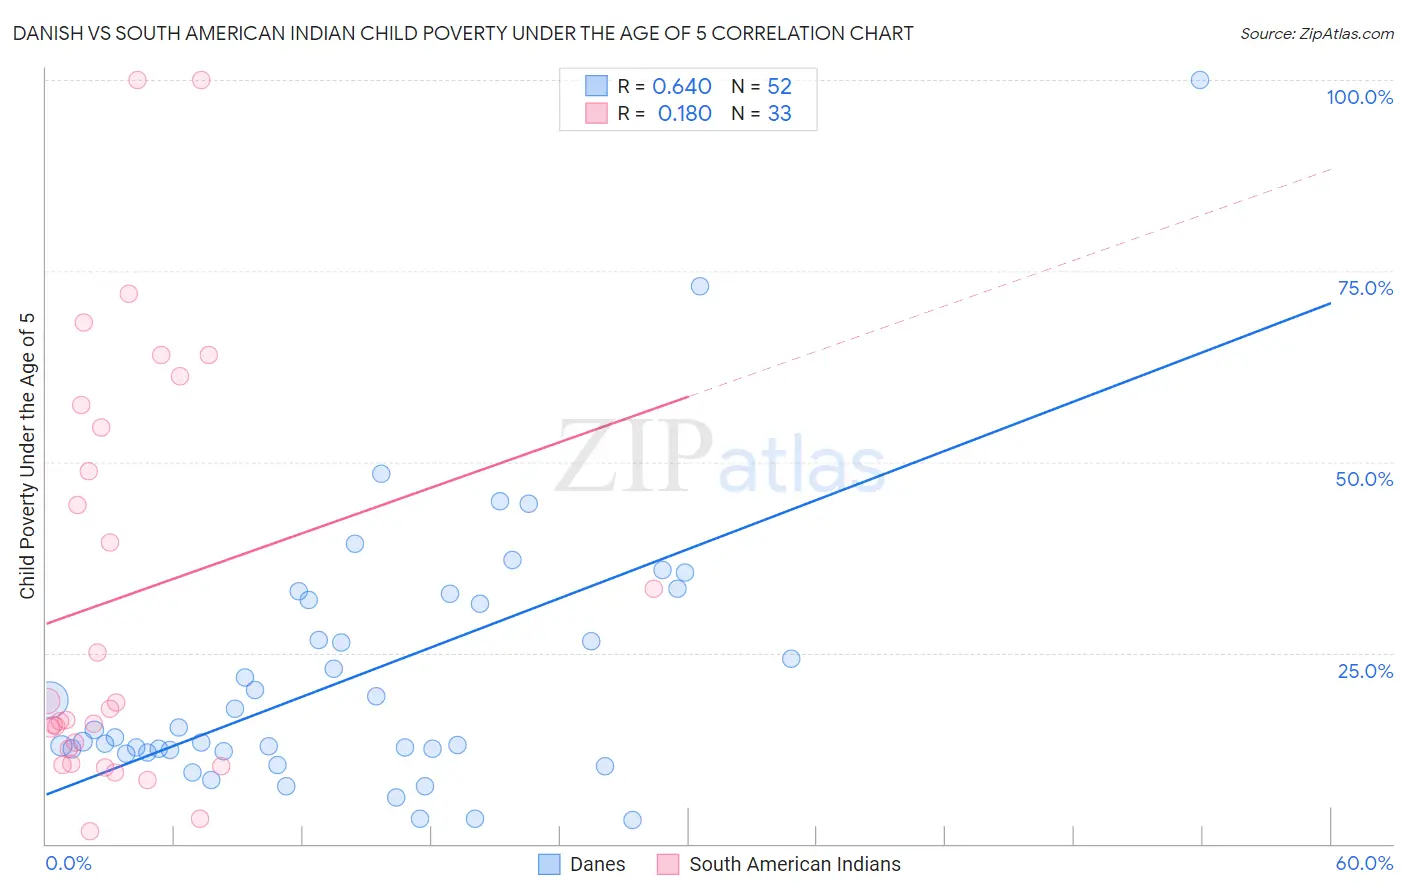 Danish vs South American Indian Child Poverty Under the Age of 5